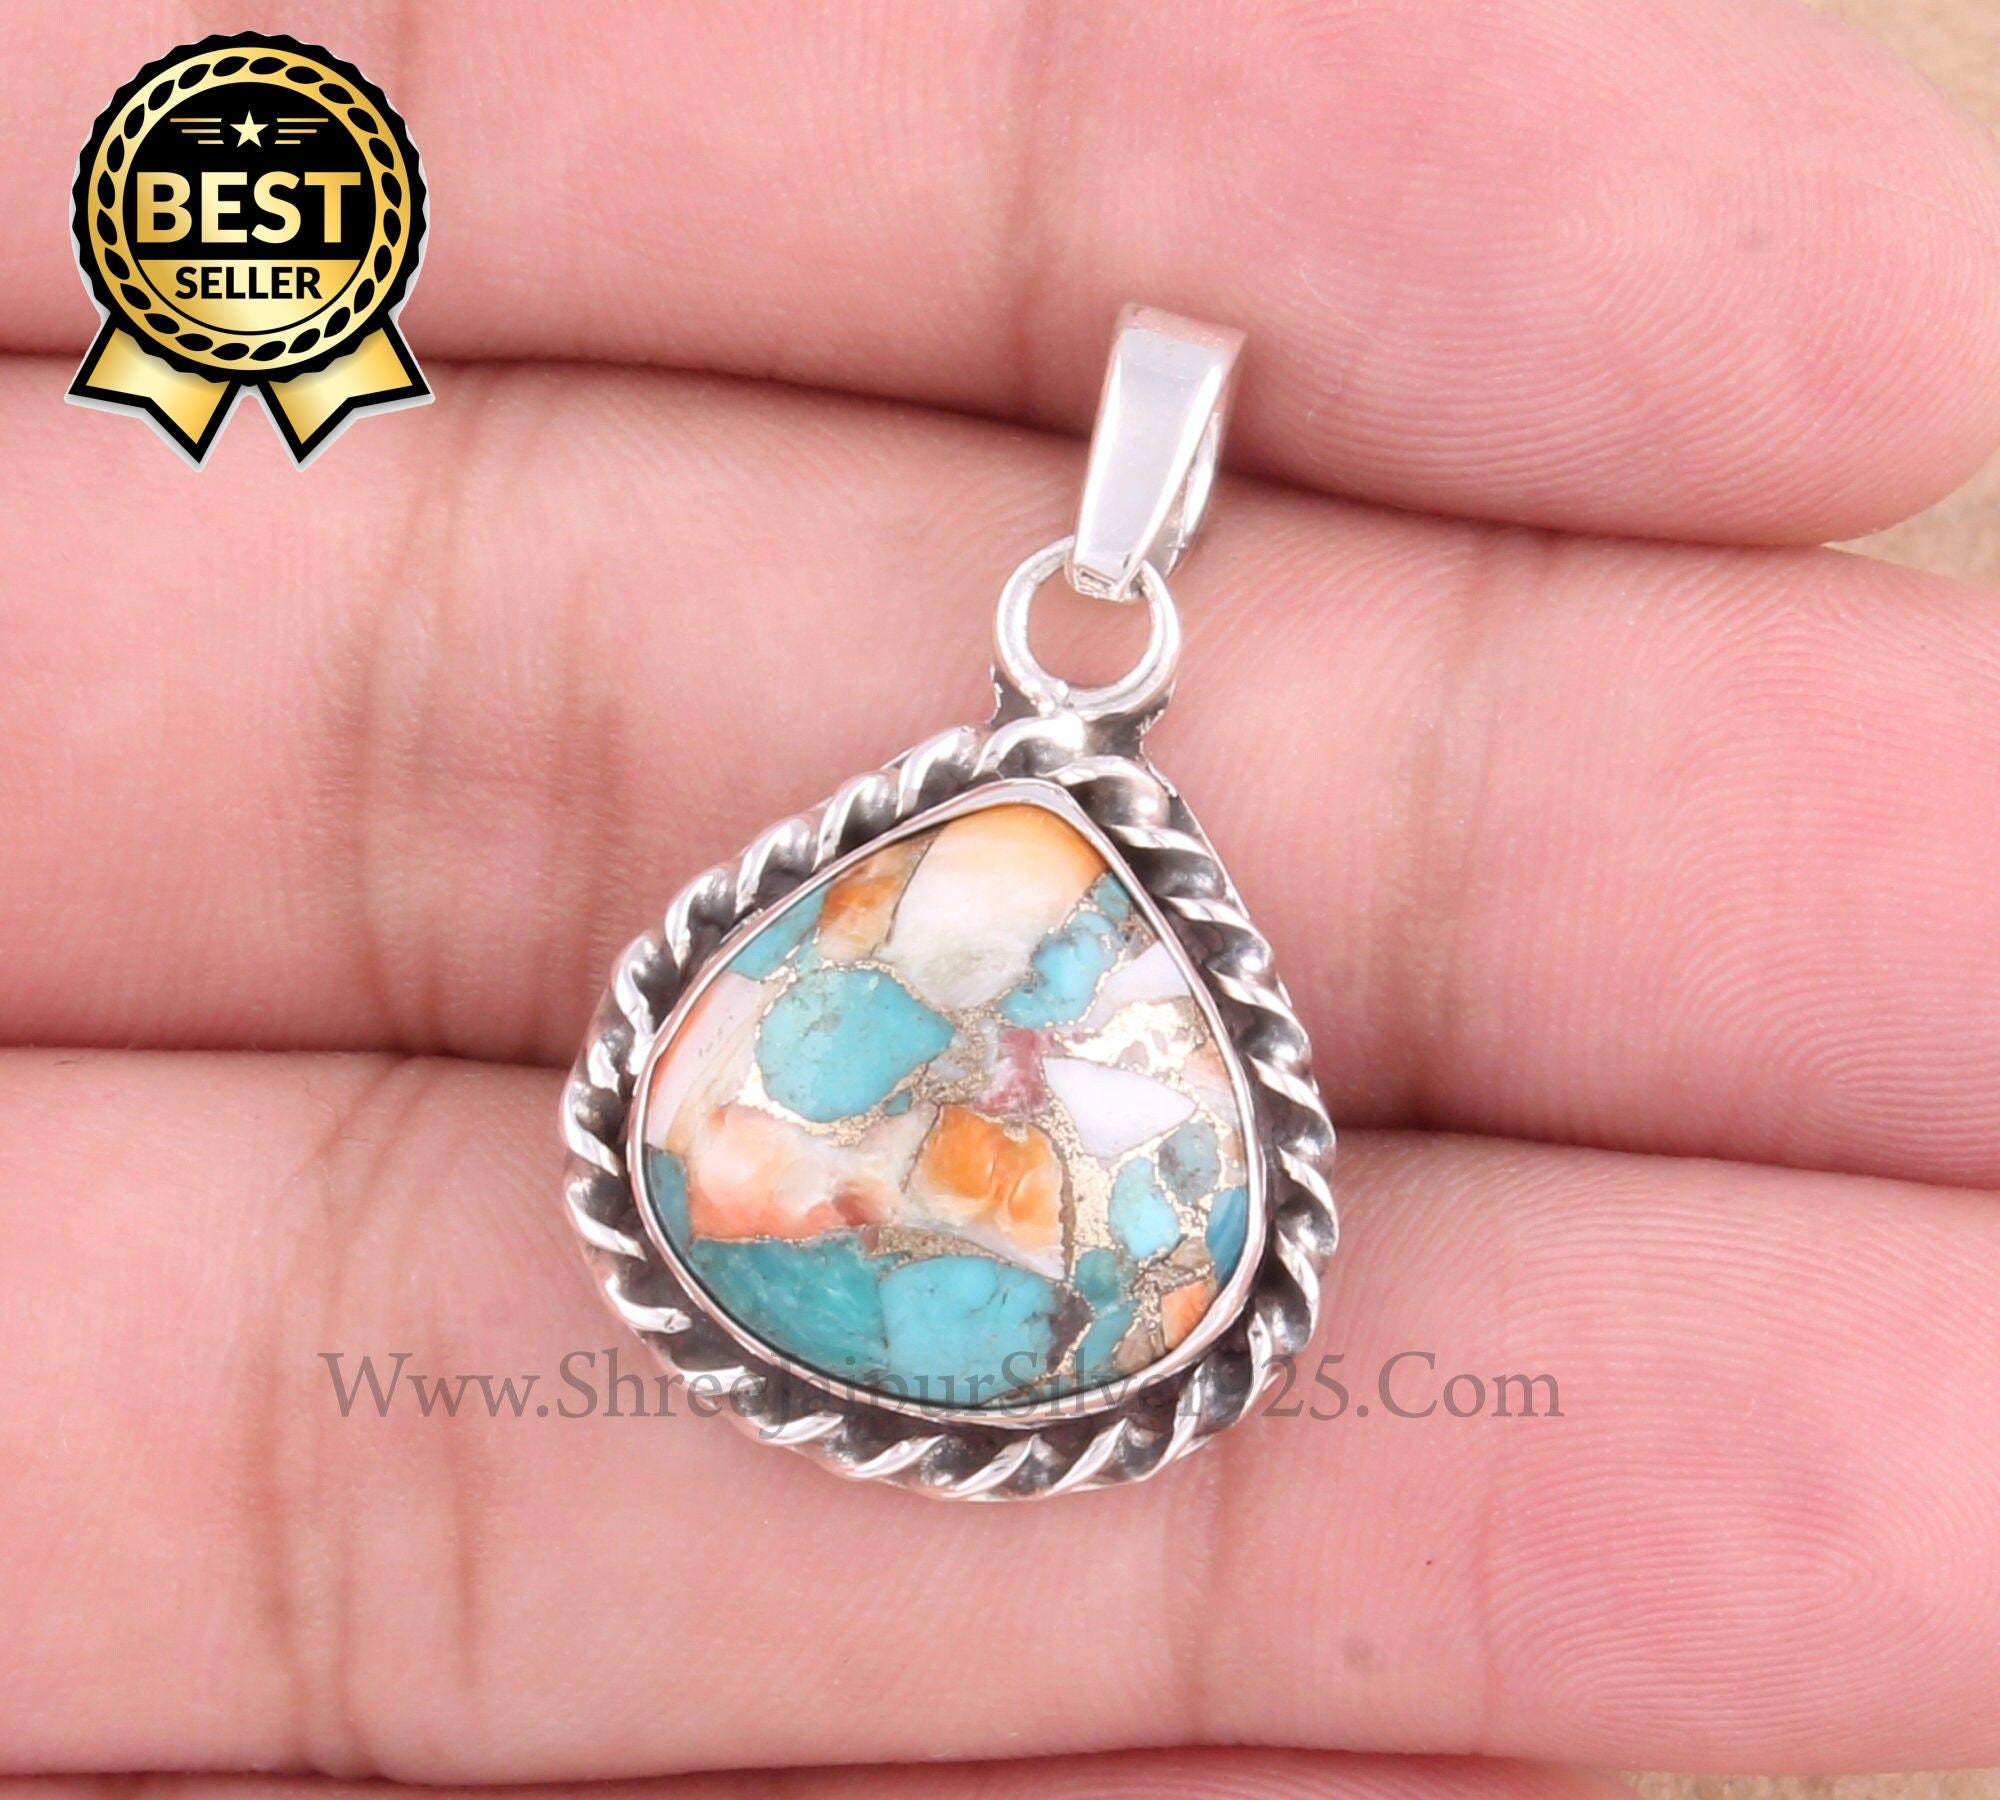 Agate Upside Down Teardrop Stone Pendant Rubber Cord Necklace Sterling Silver Bail 18 Inches